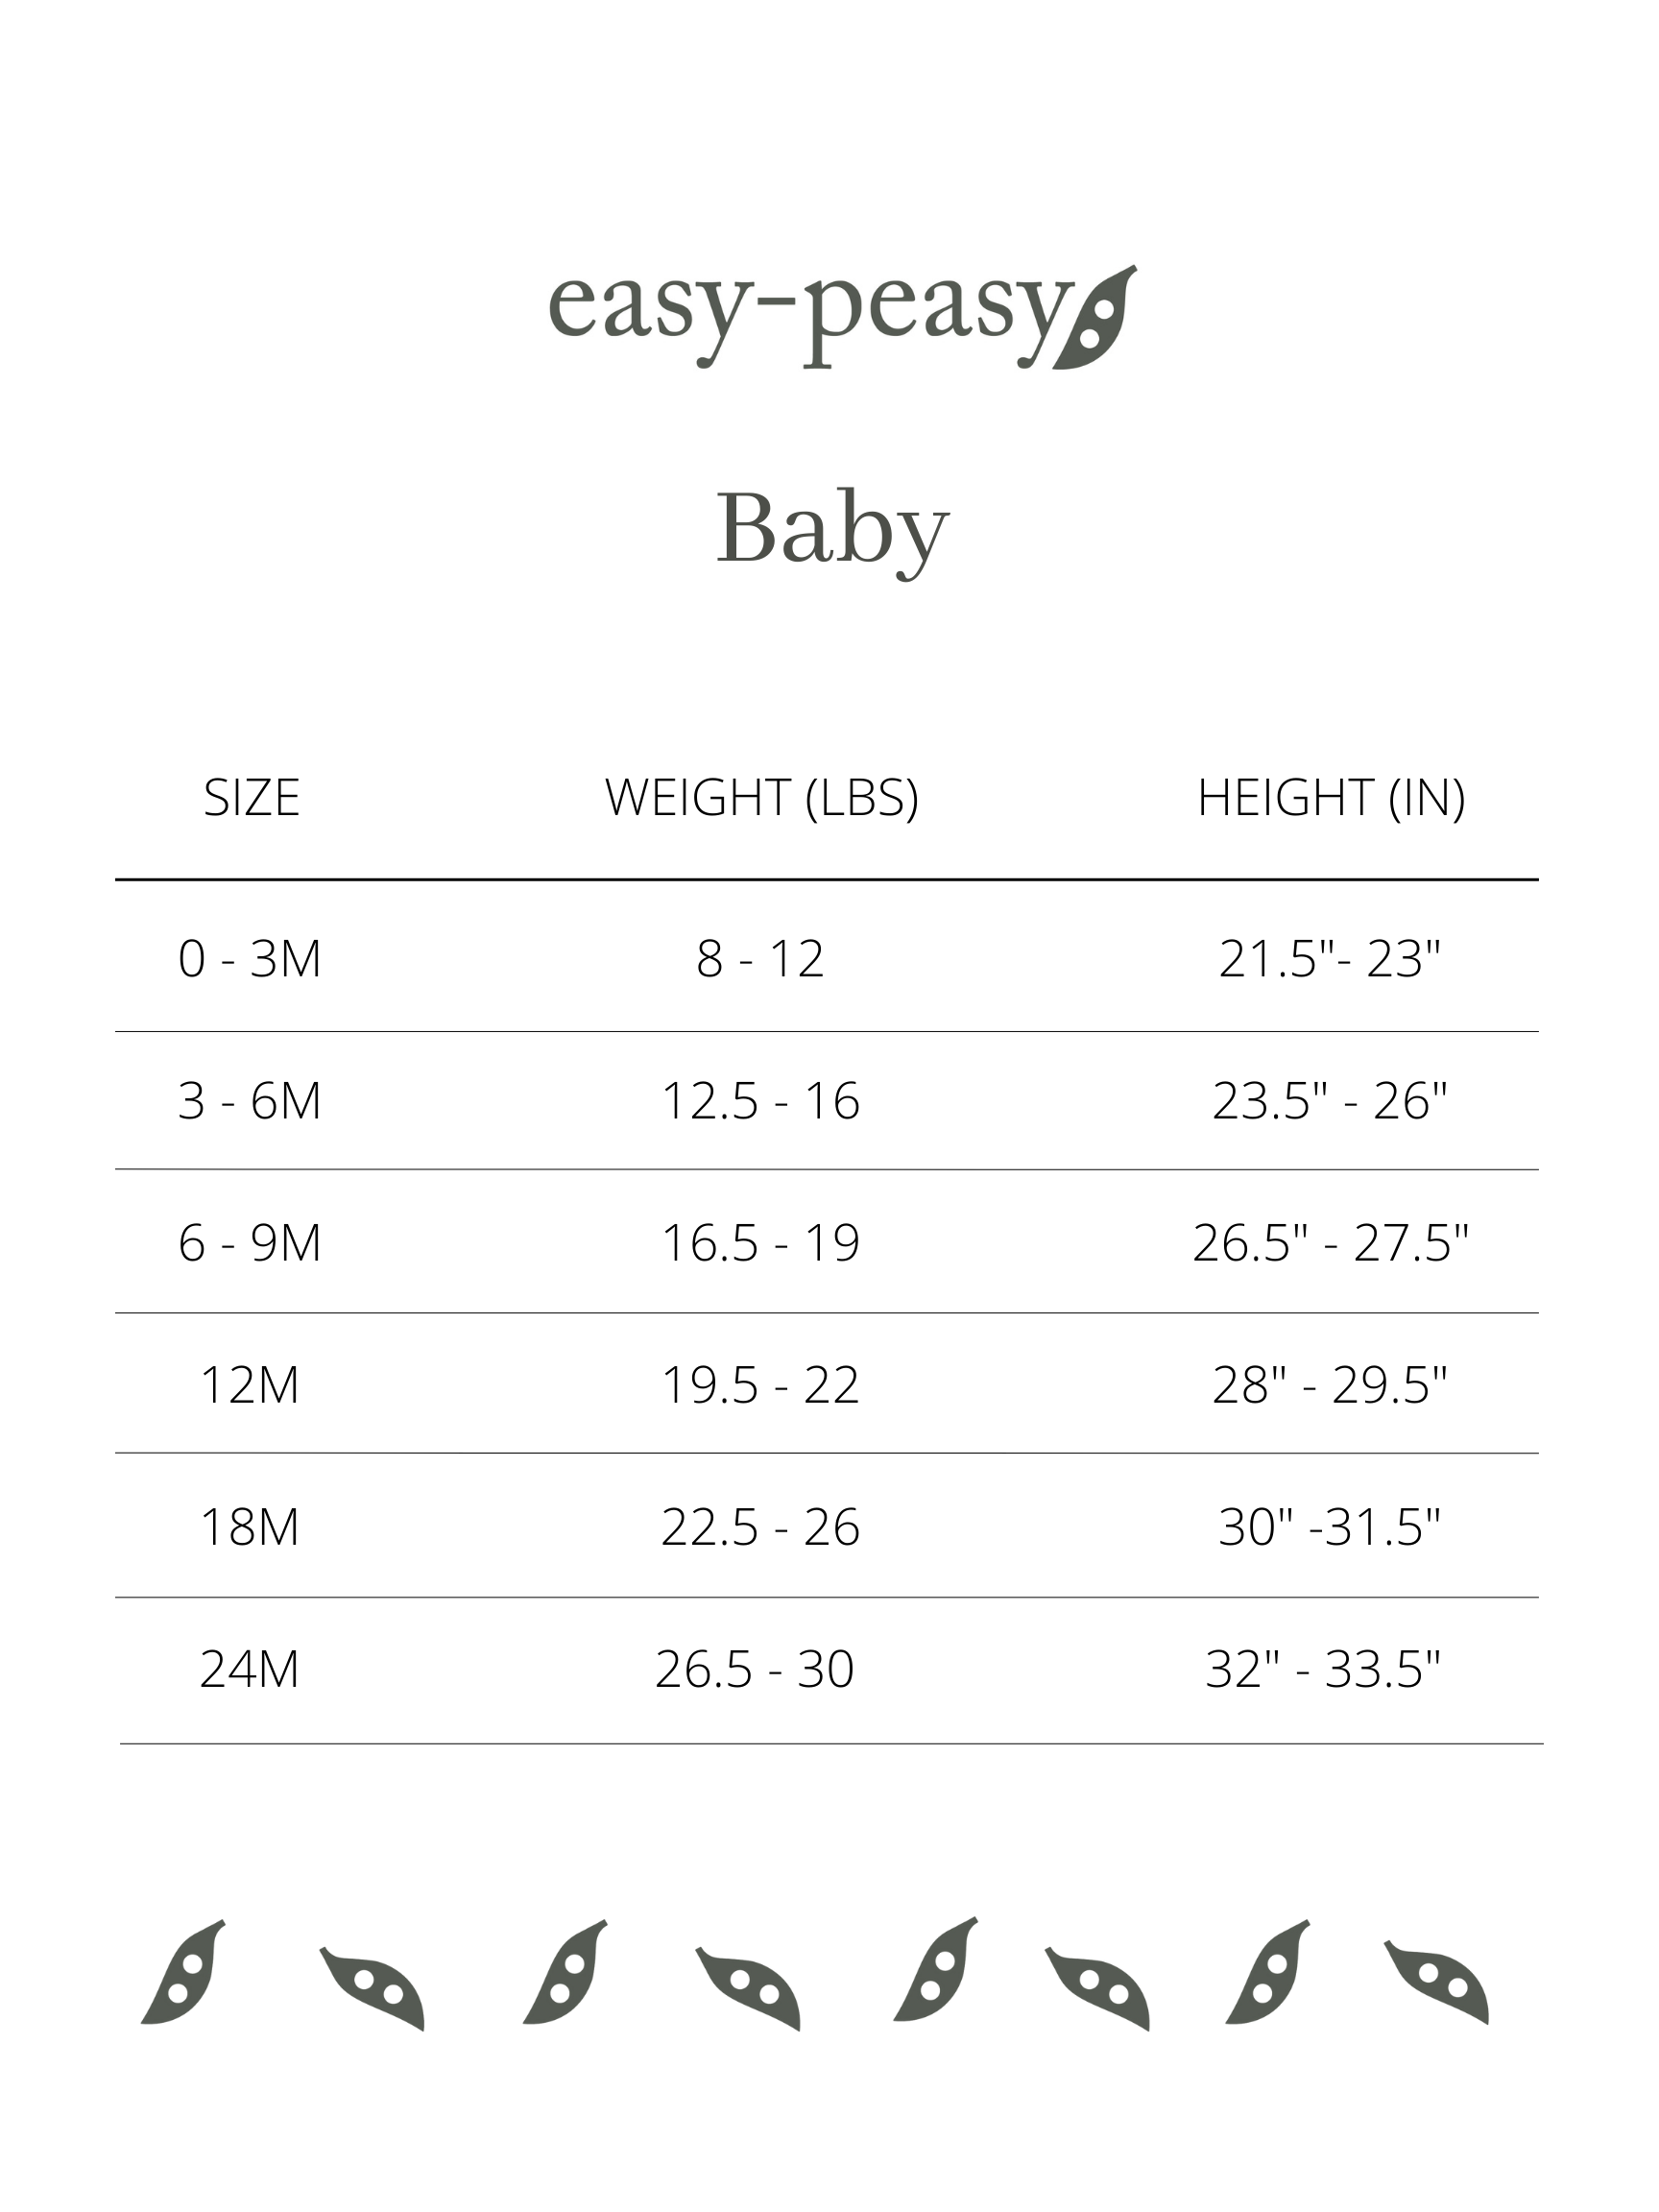 easy-peasy Baby Short Sleeve Solid Tee, Sizes 0M-24M - image 4 of 4